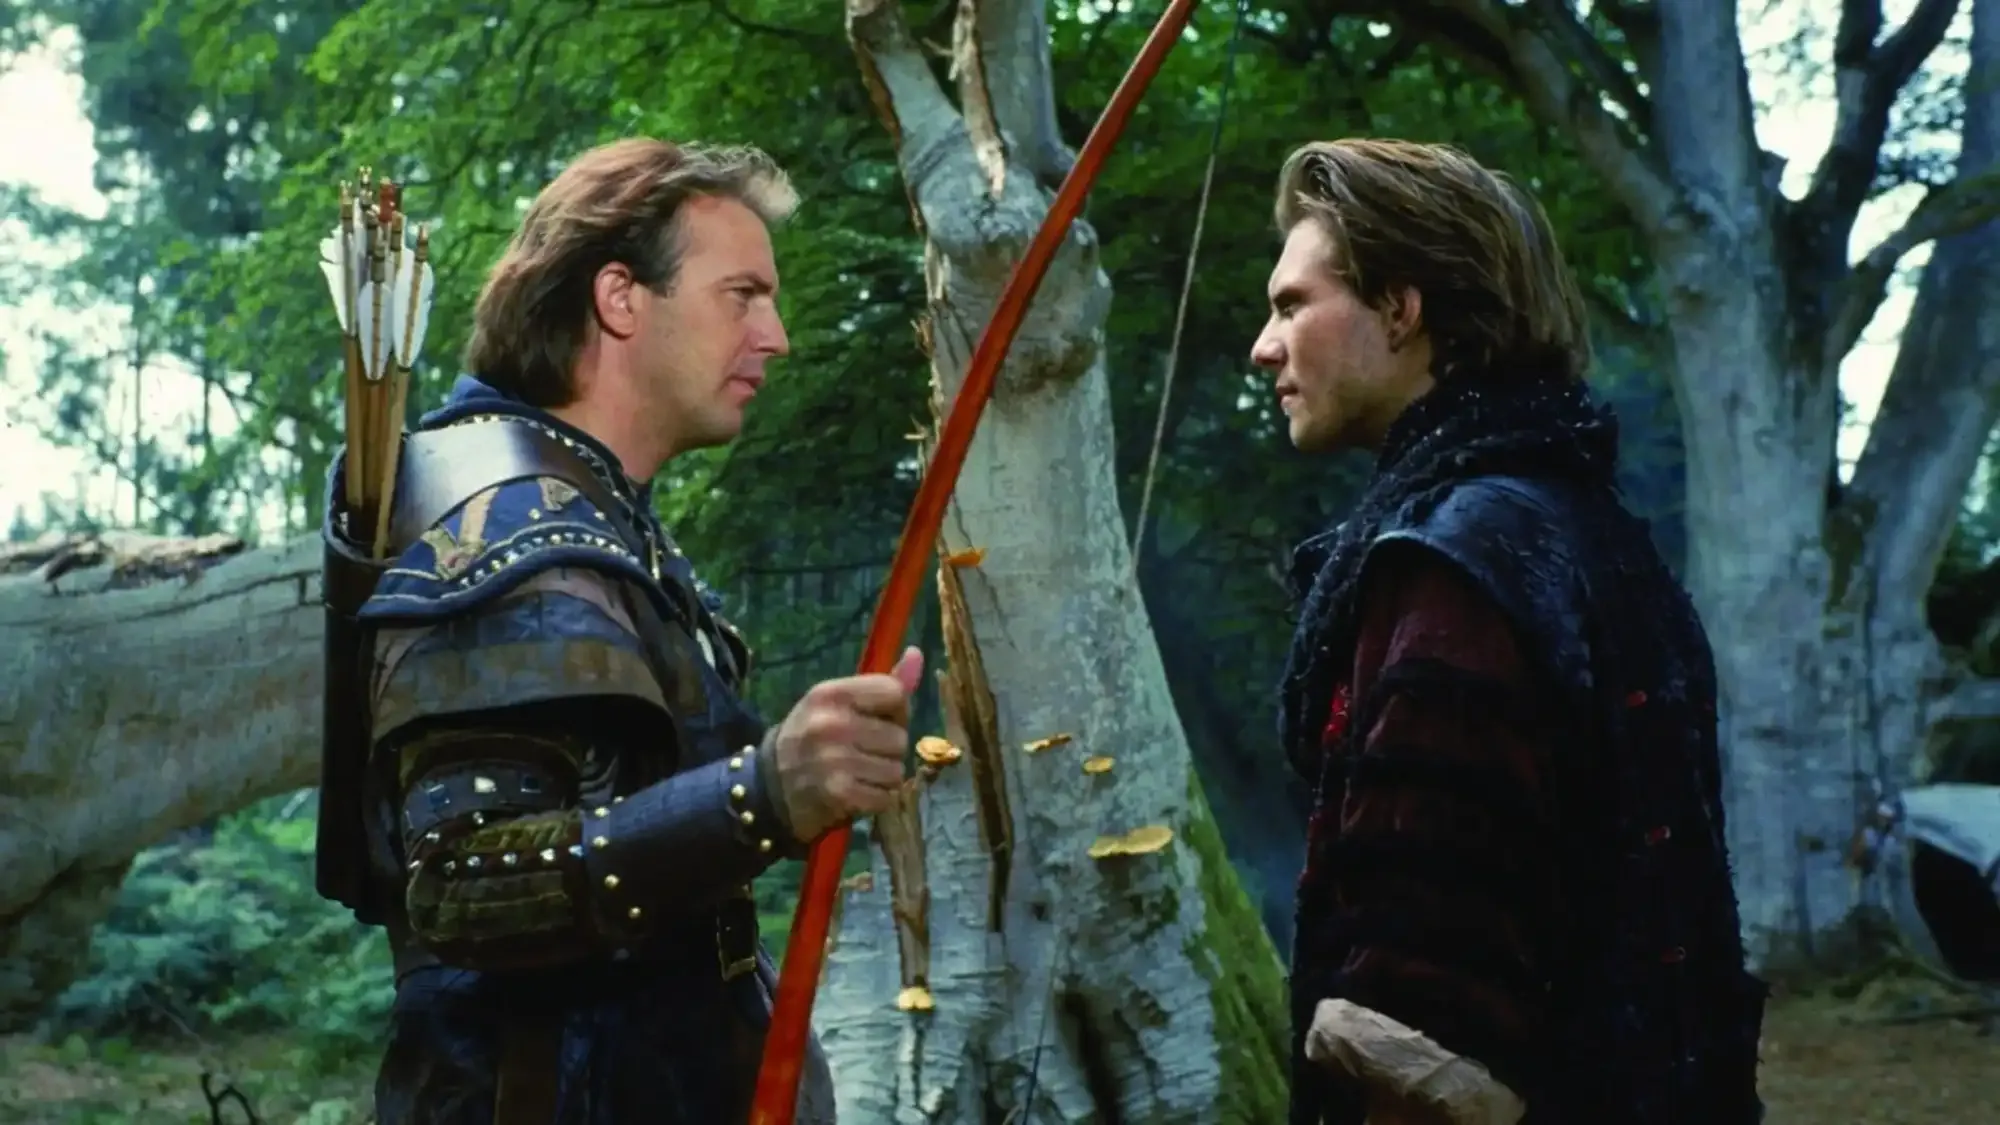 Robin Hood: Prince of Thieves movie review